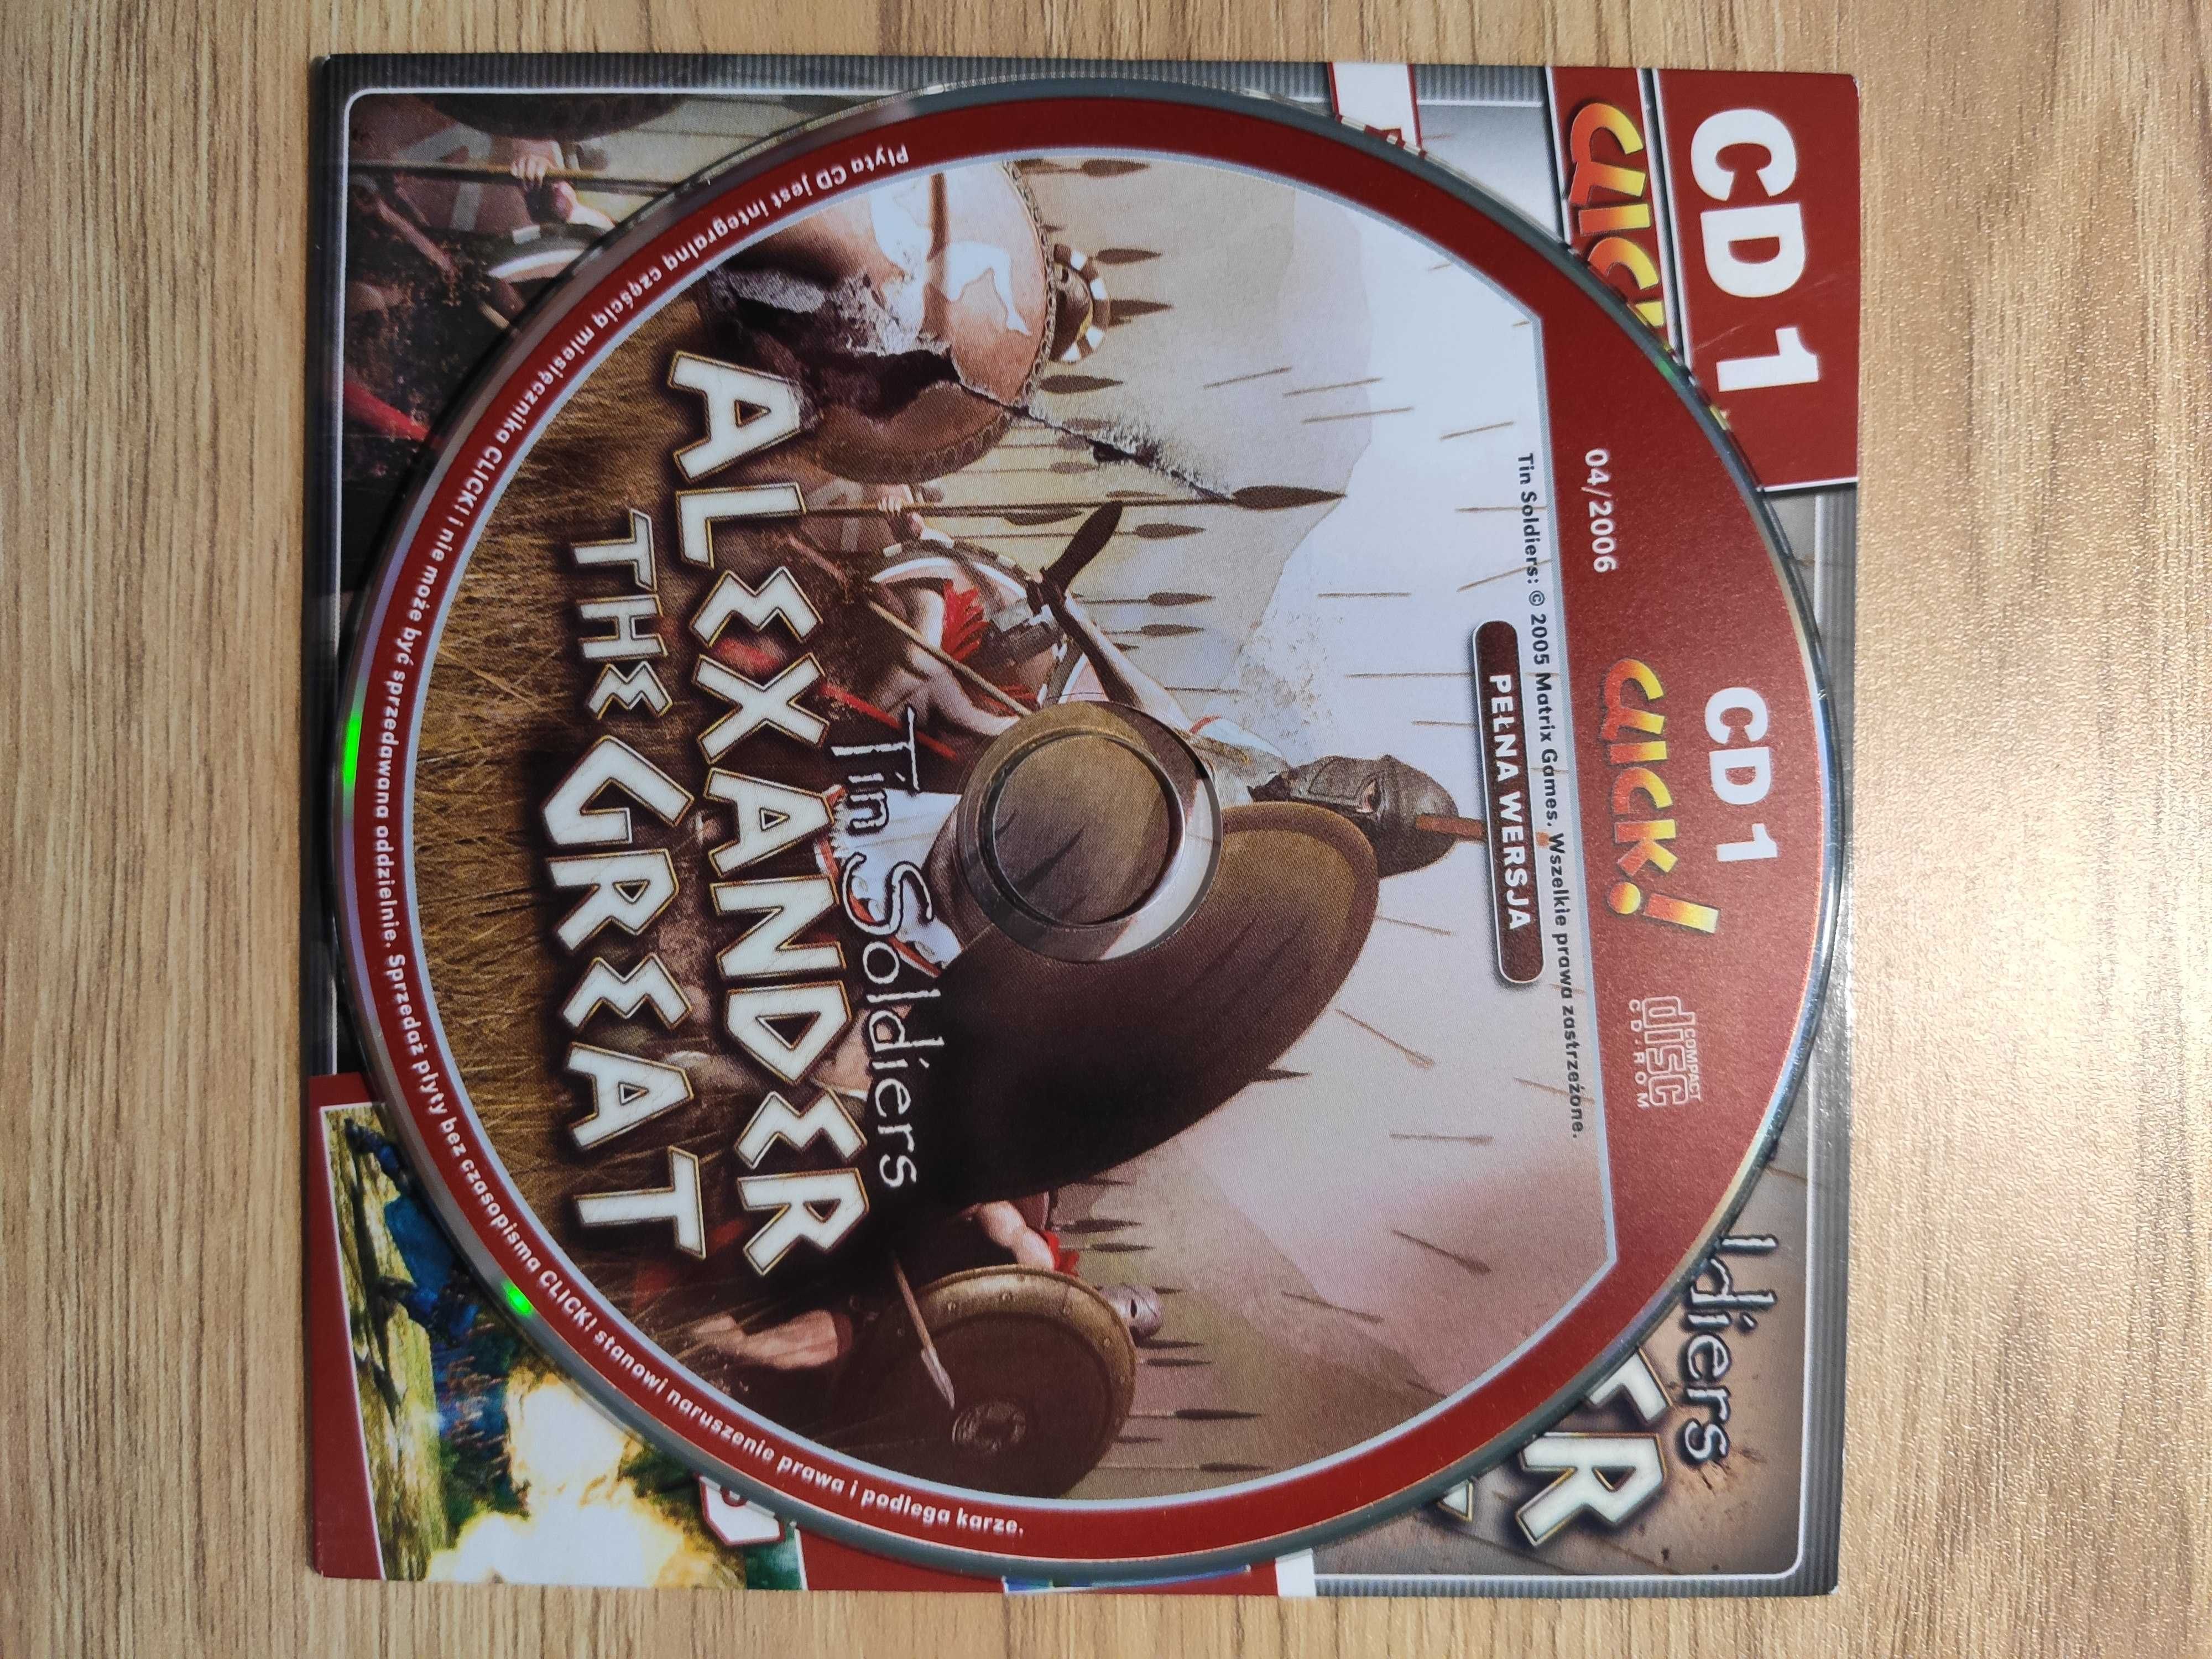 Tin soldiers Alexander the great gra PC